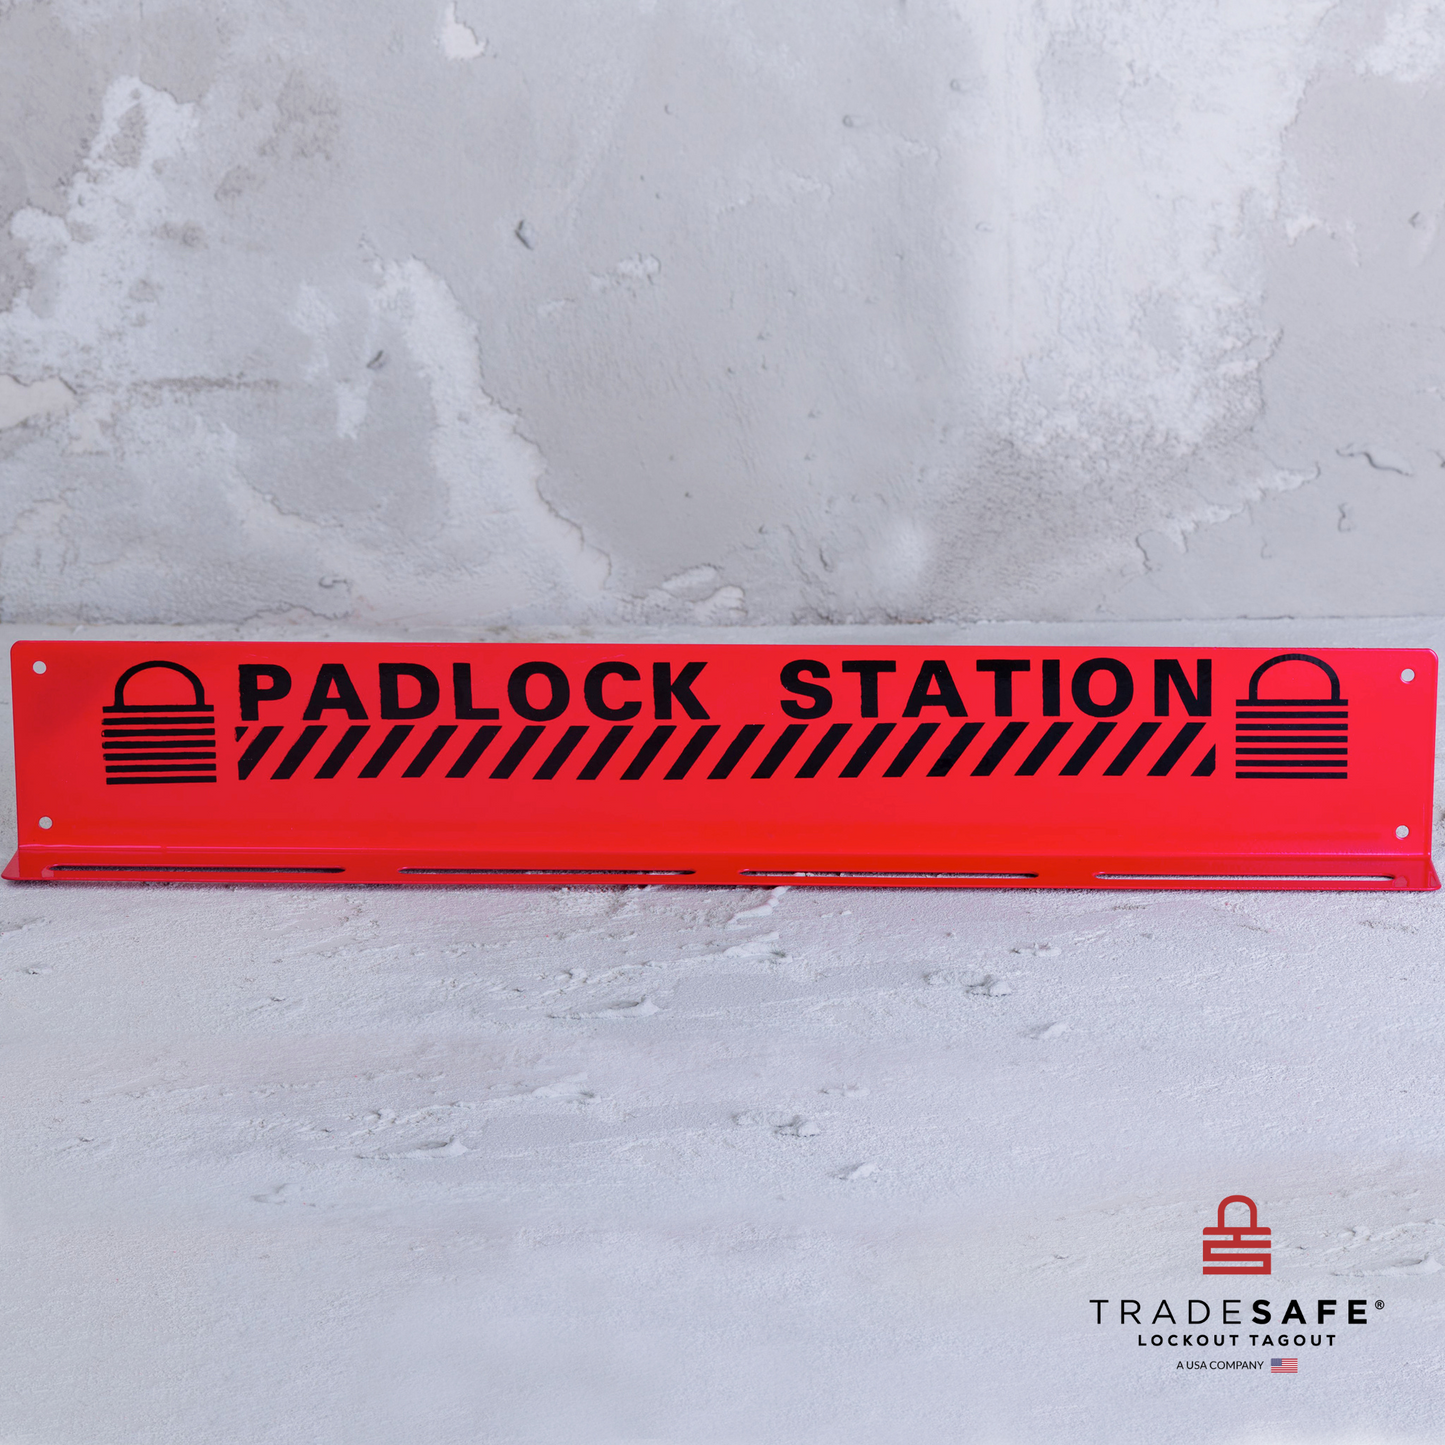 front view of a red safety padlock lockout station in an industrial setting